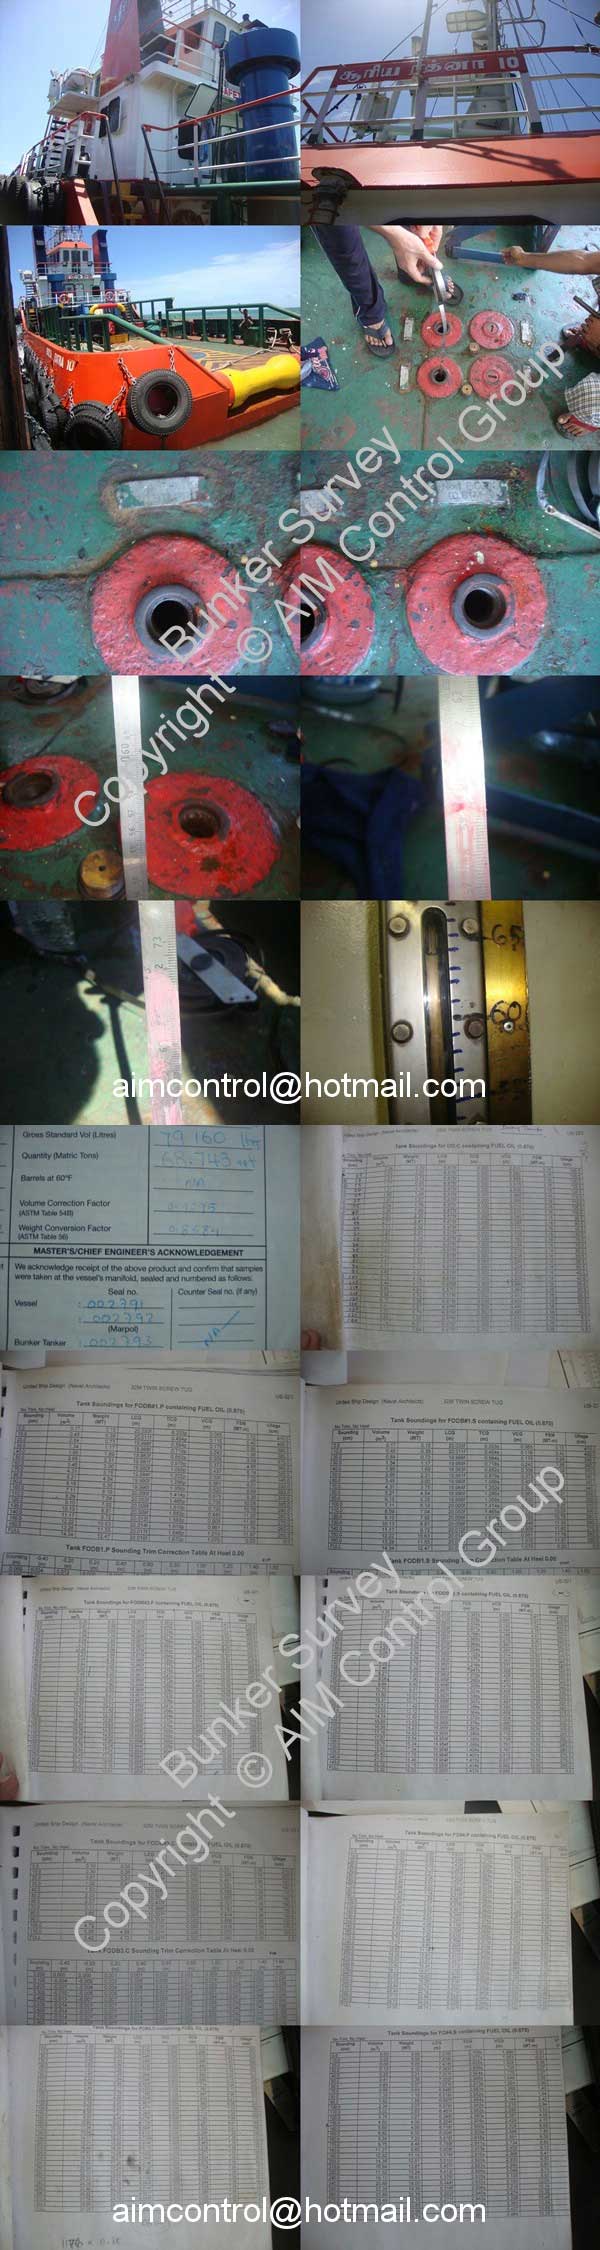 A_Oils_bunker_survey_to_certify_a_quantities_of_oils_Bunkering_services_for_ship_vessel_AIM_Control